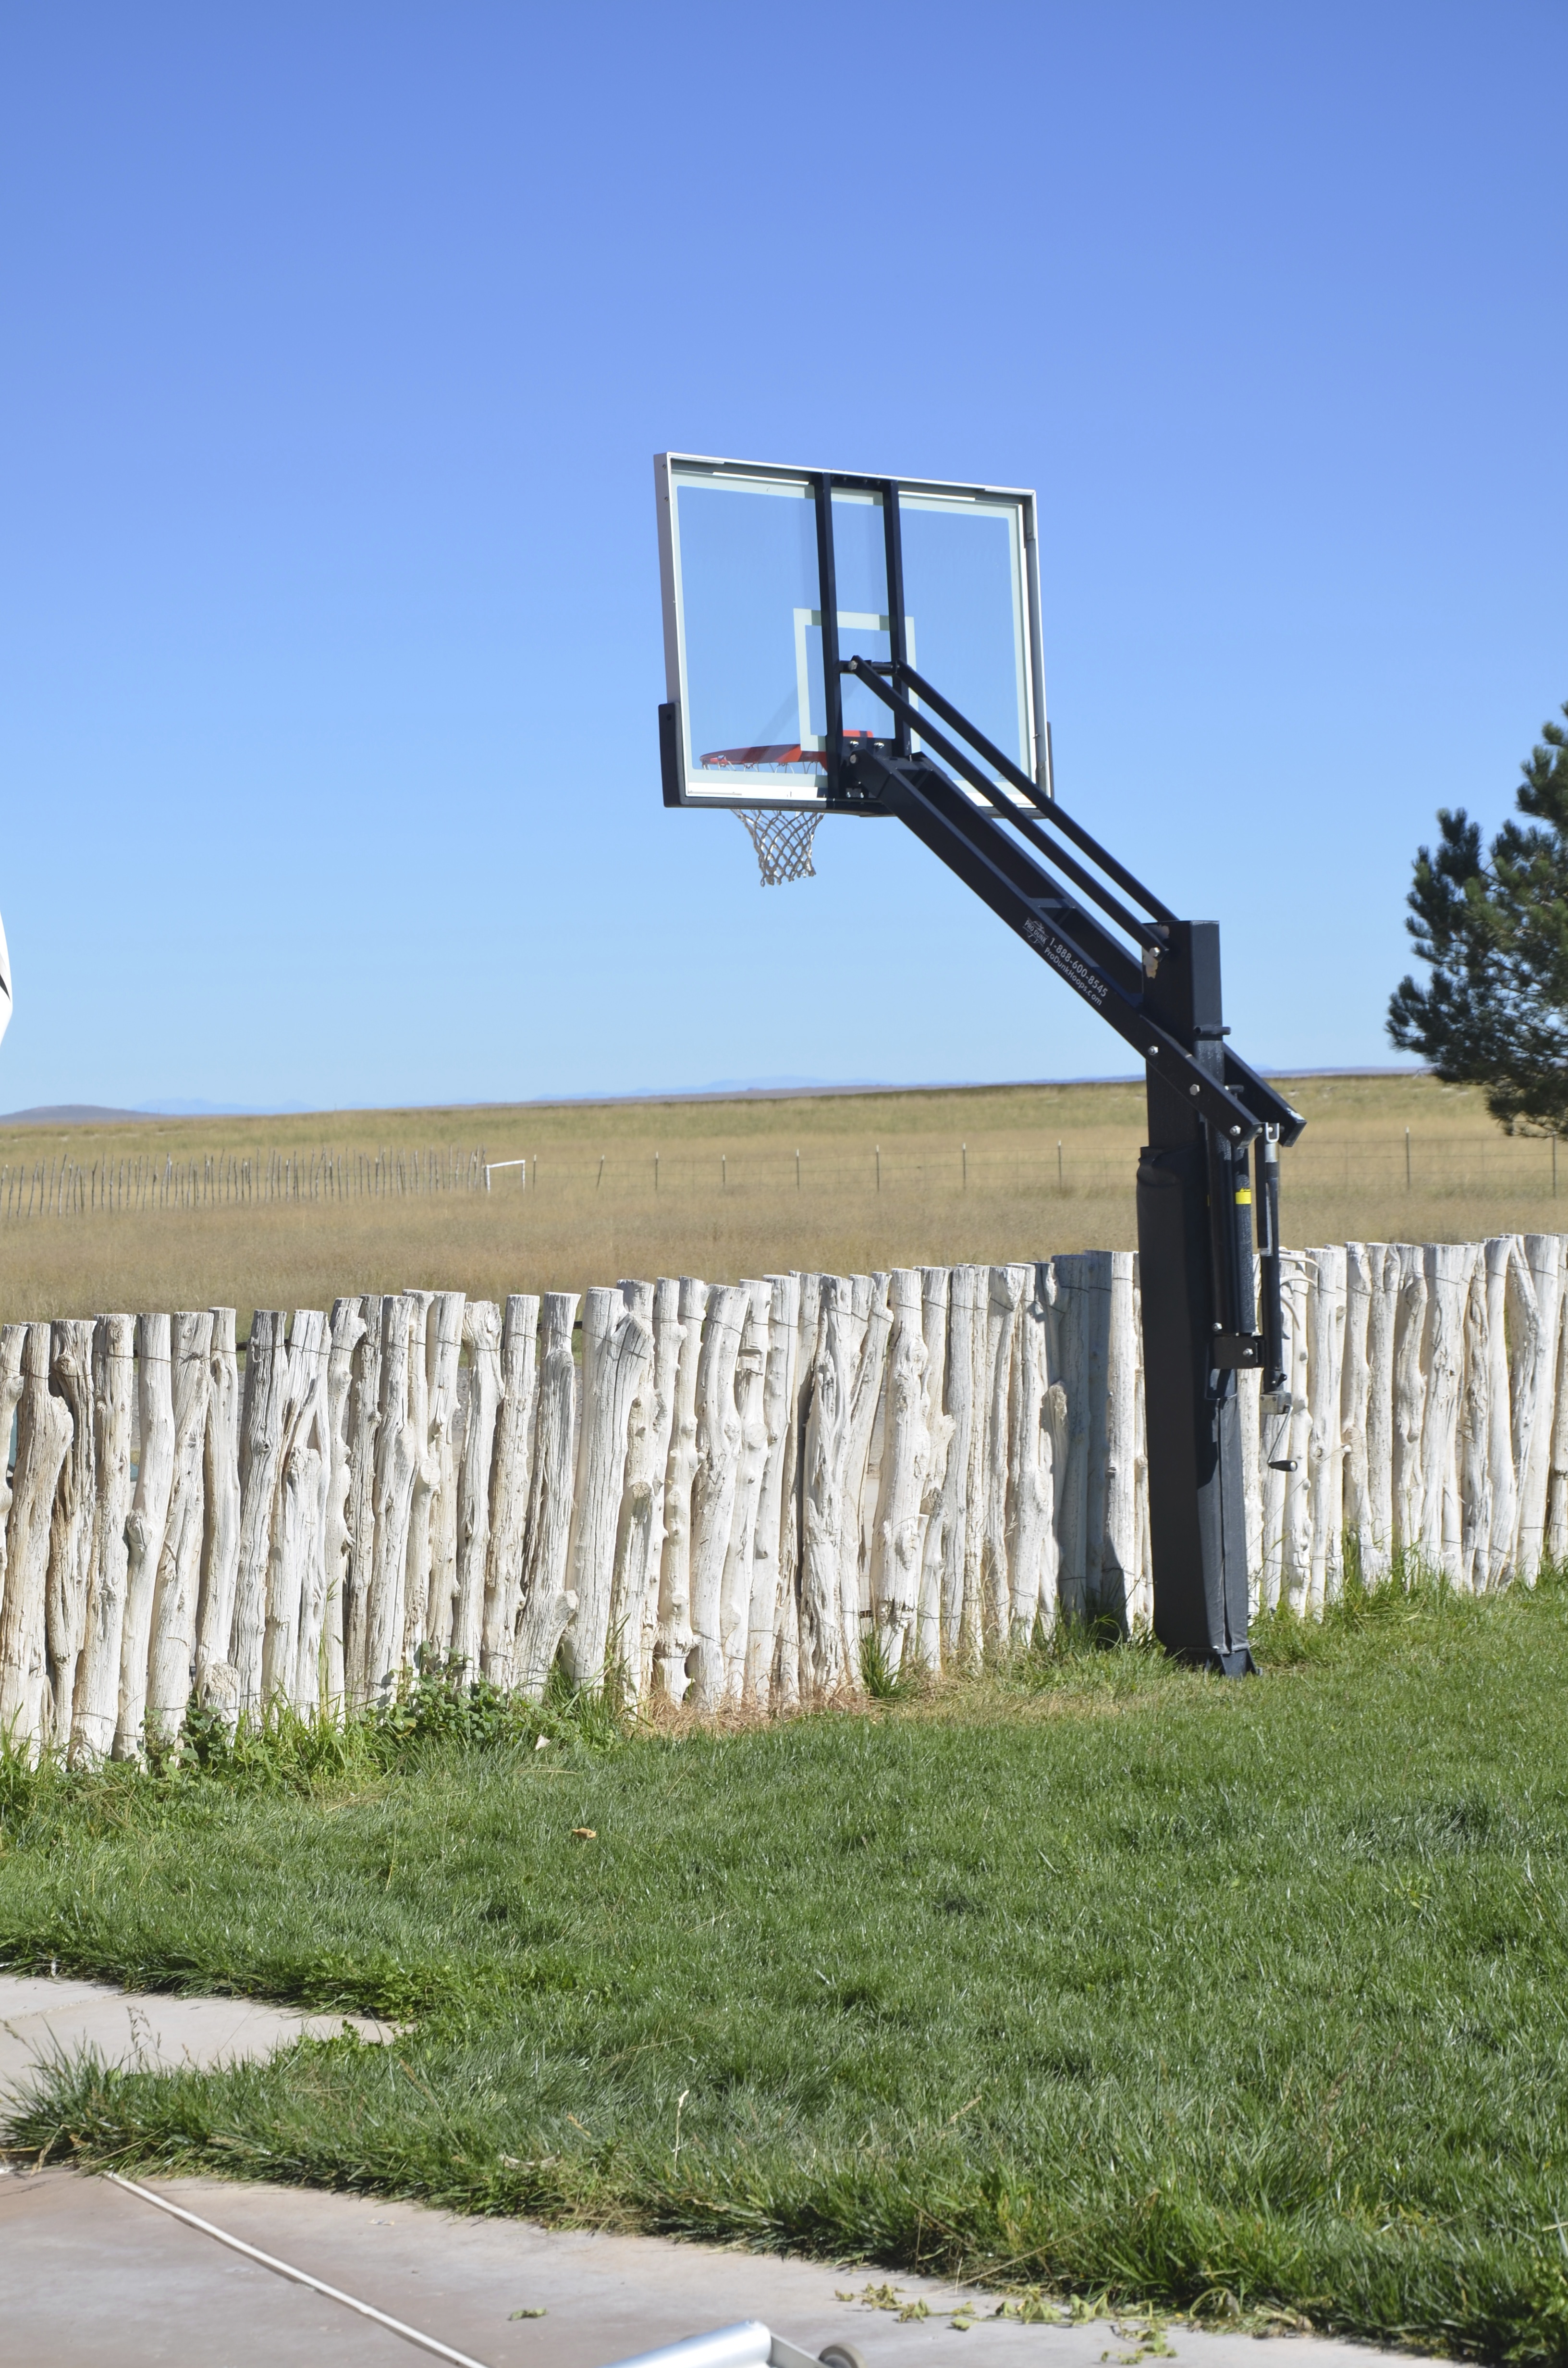 There is a Pro Dunk Platinum Basketball System in front of the stick fence.